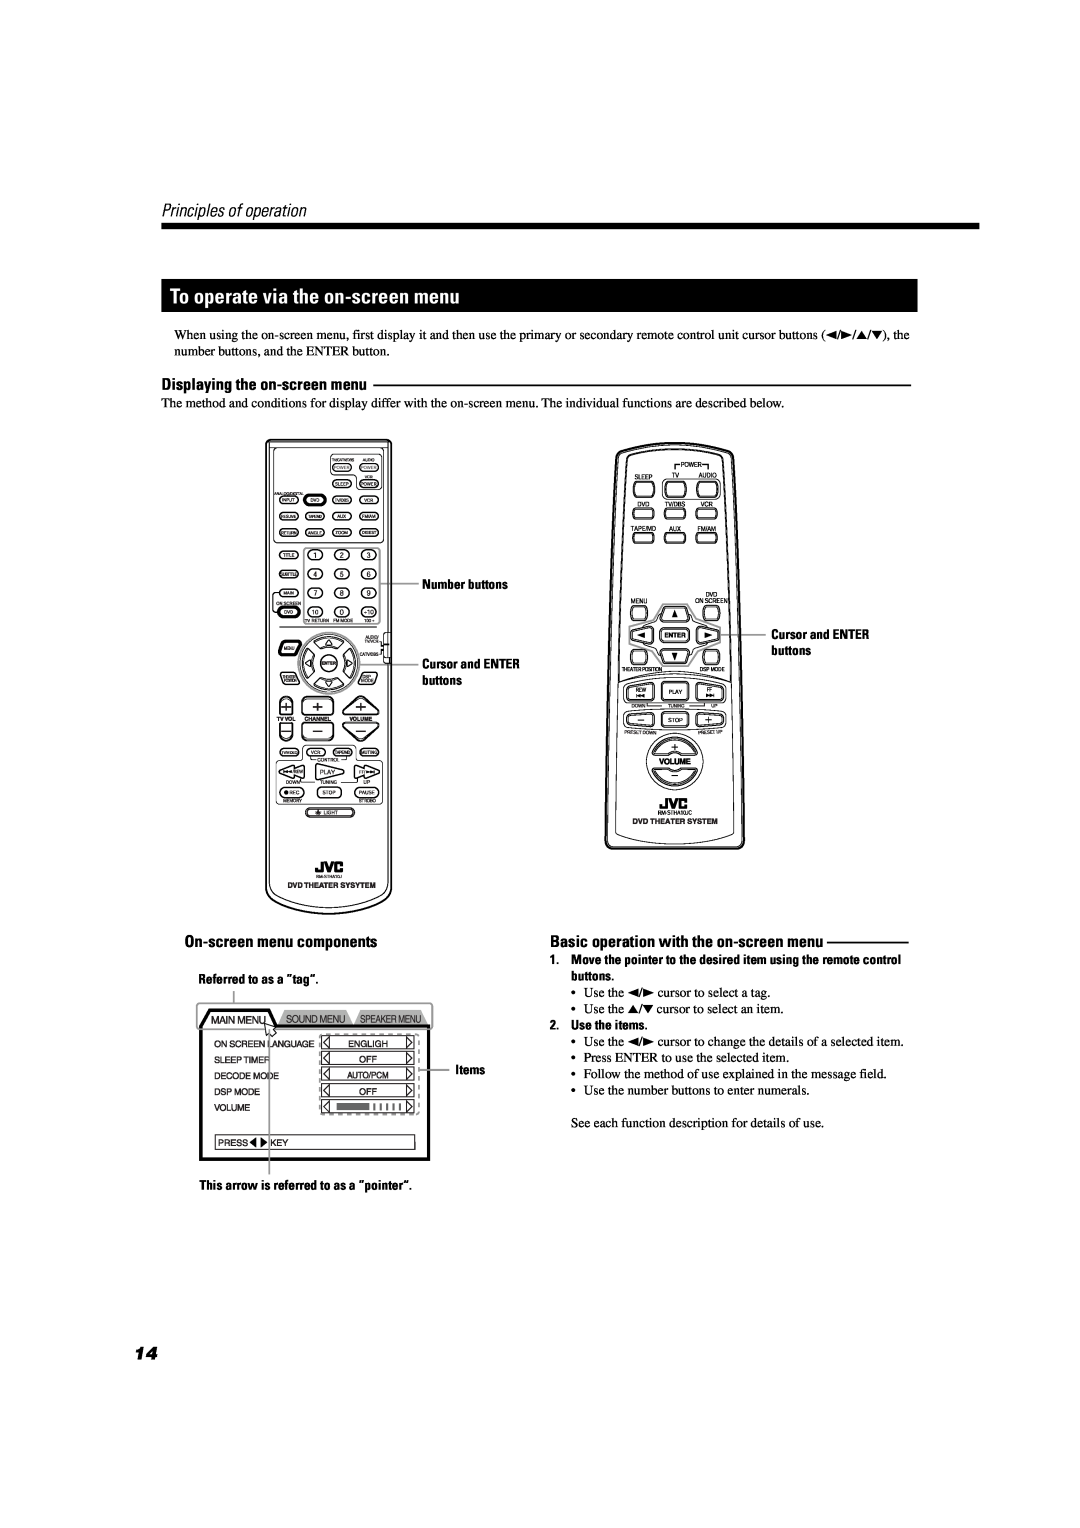 JVC TH-A10 To operate via the on-screenmenu, Principles of operation, On-screenmenu components, Cursor and ENTER buttons 